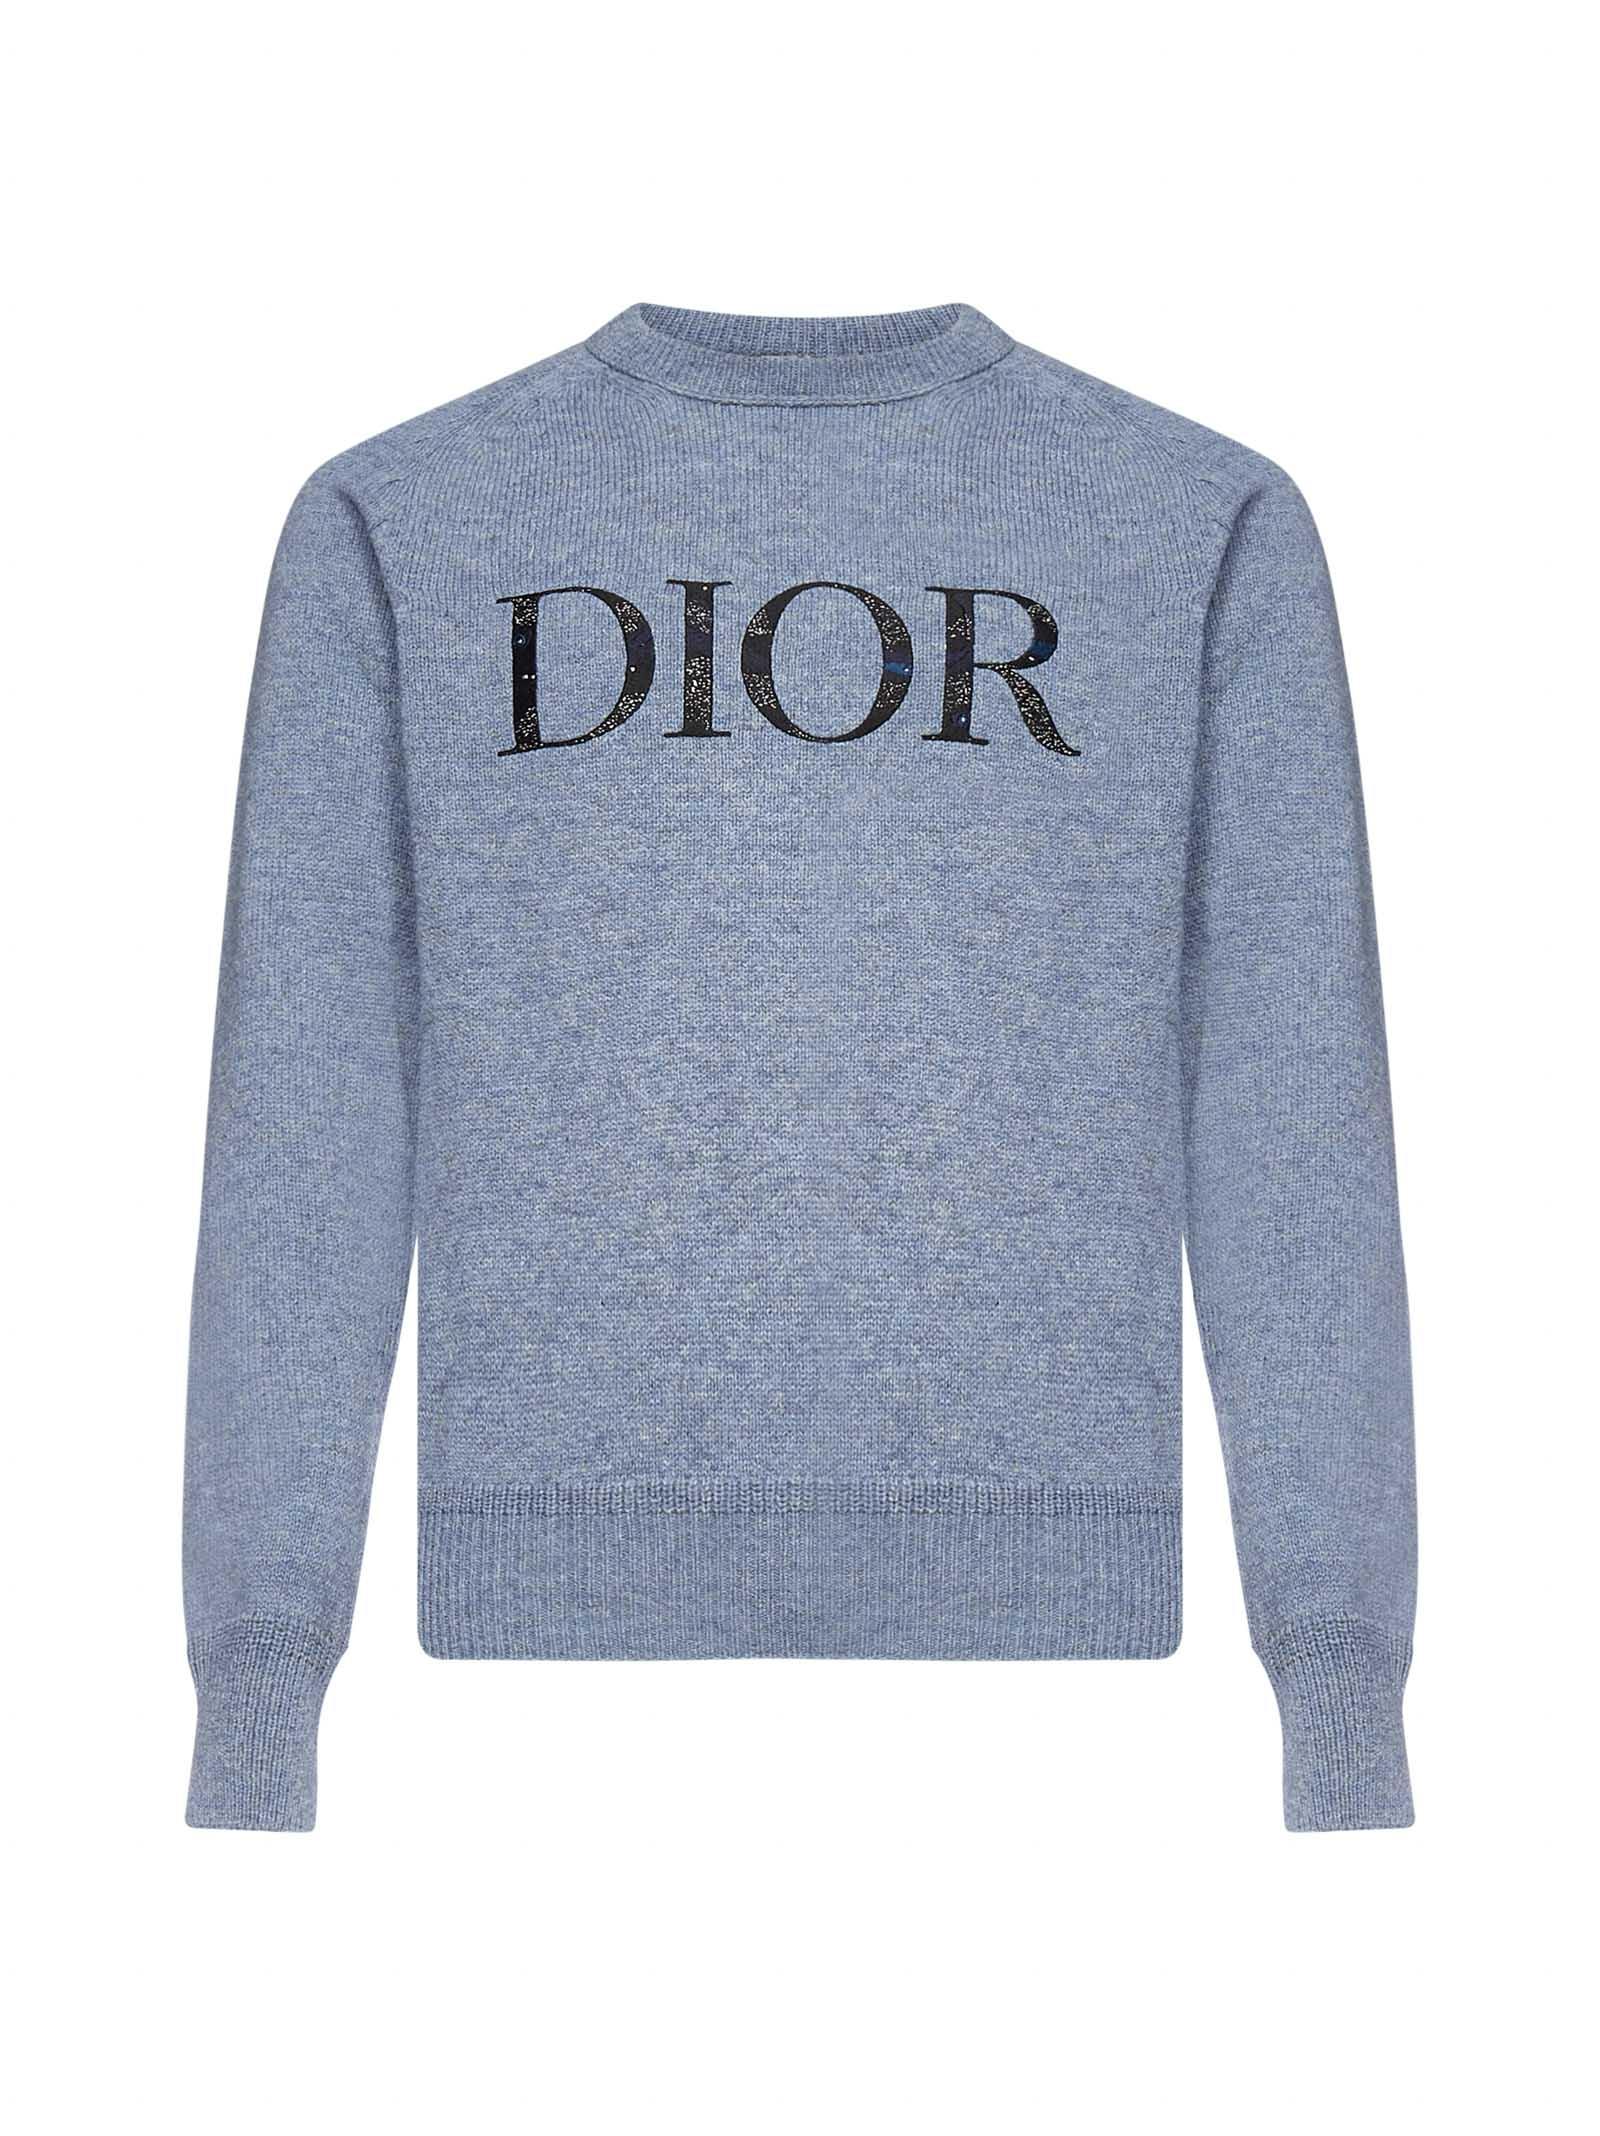 Dior Wool X Peter Doig Embroidered Knitted Sweater in Blue for Men 